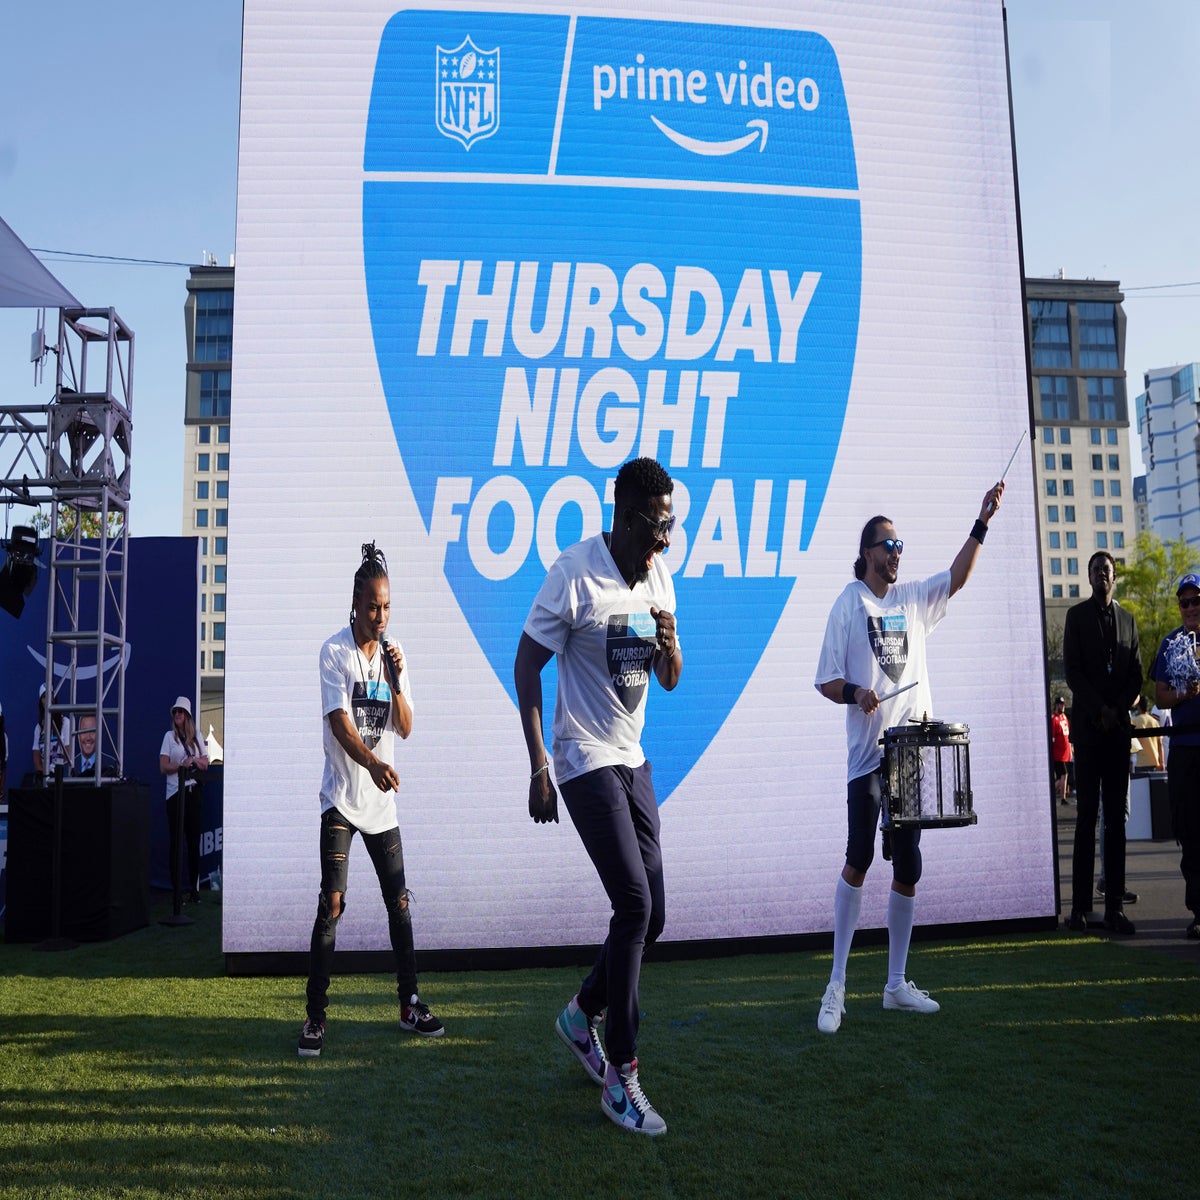 Prime Video averages 15.3M viewers in its NFL season opener